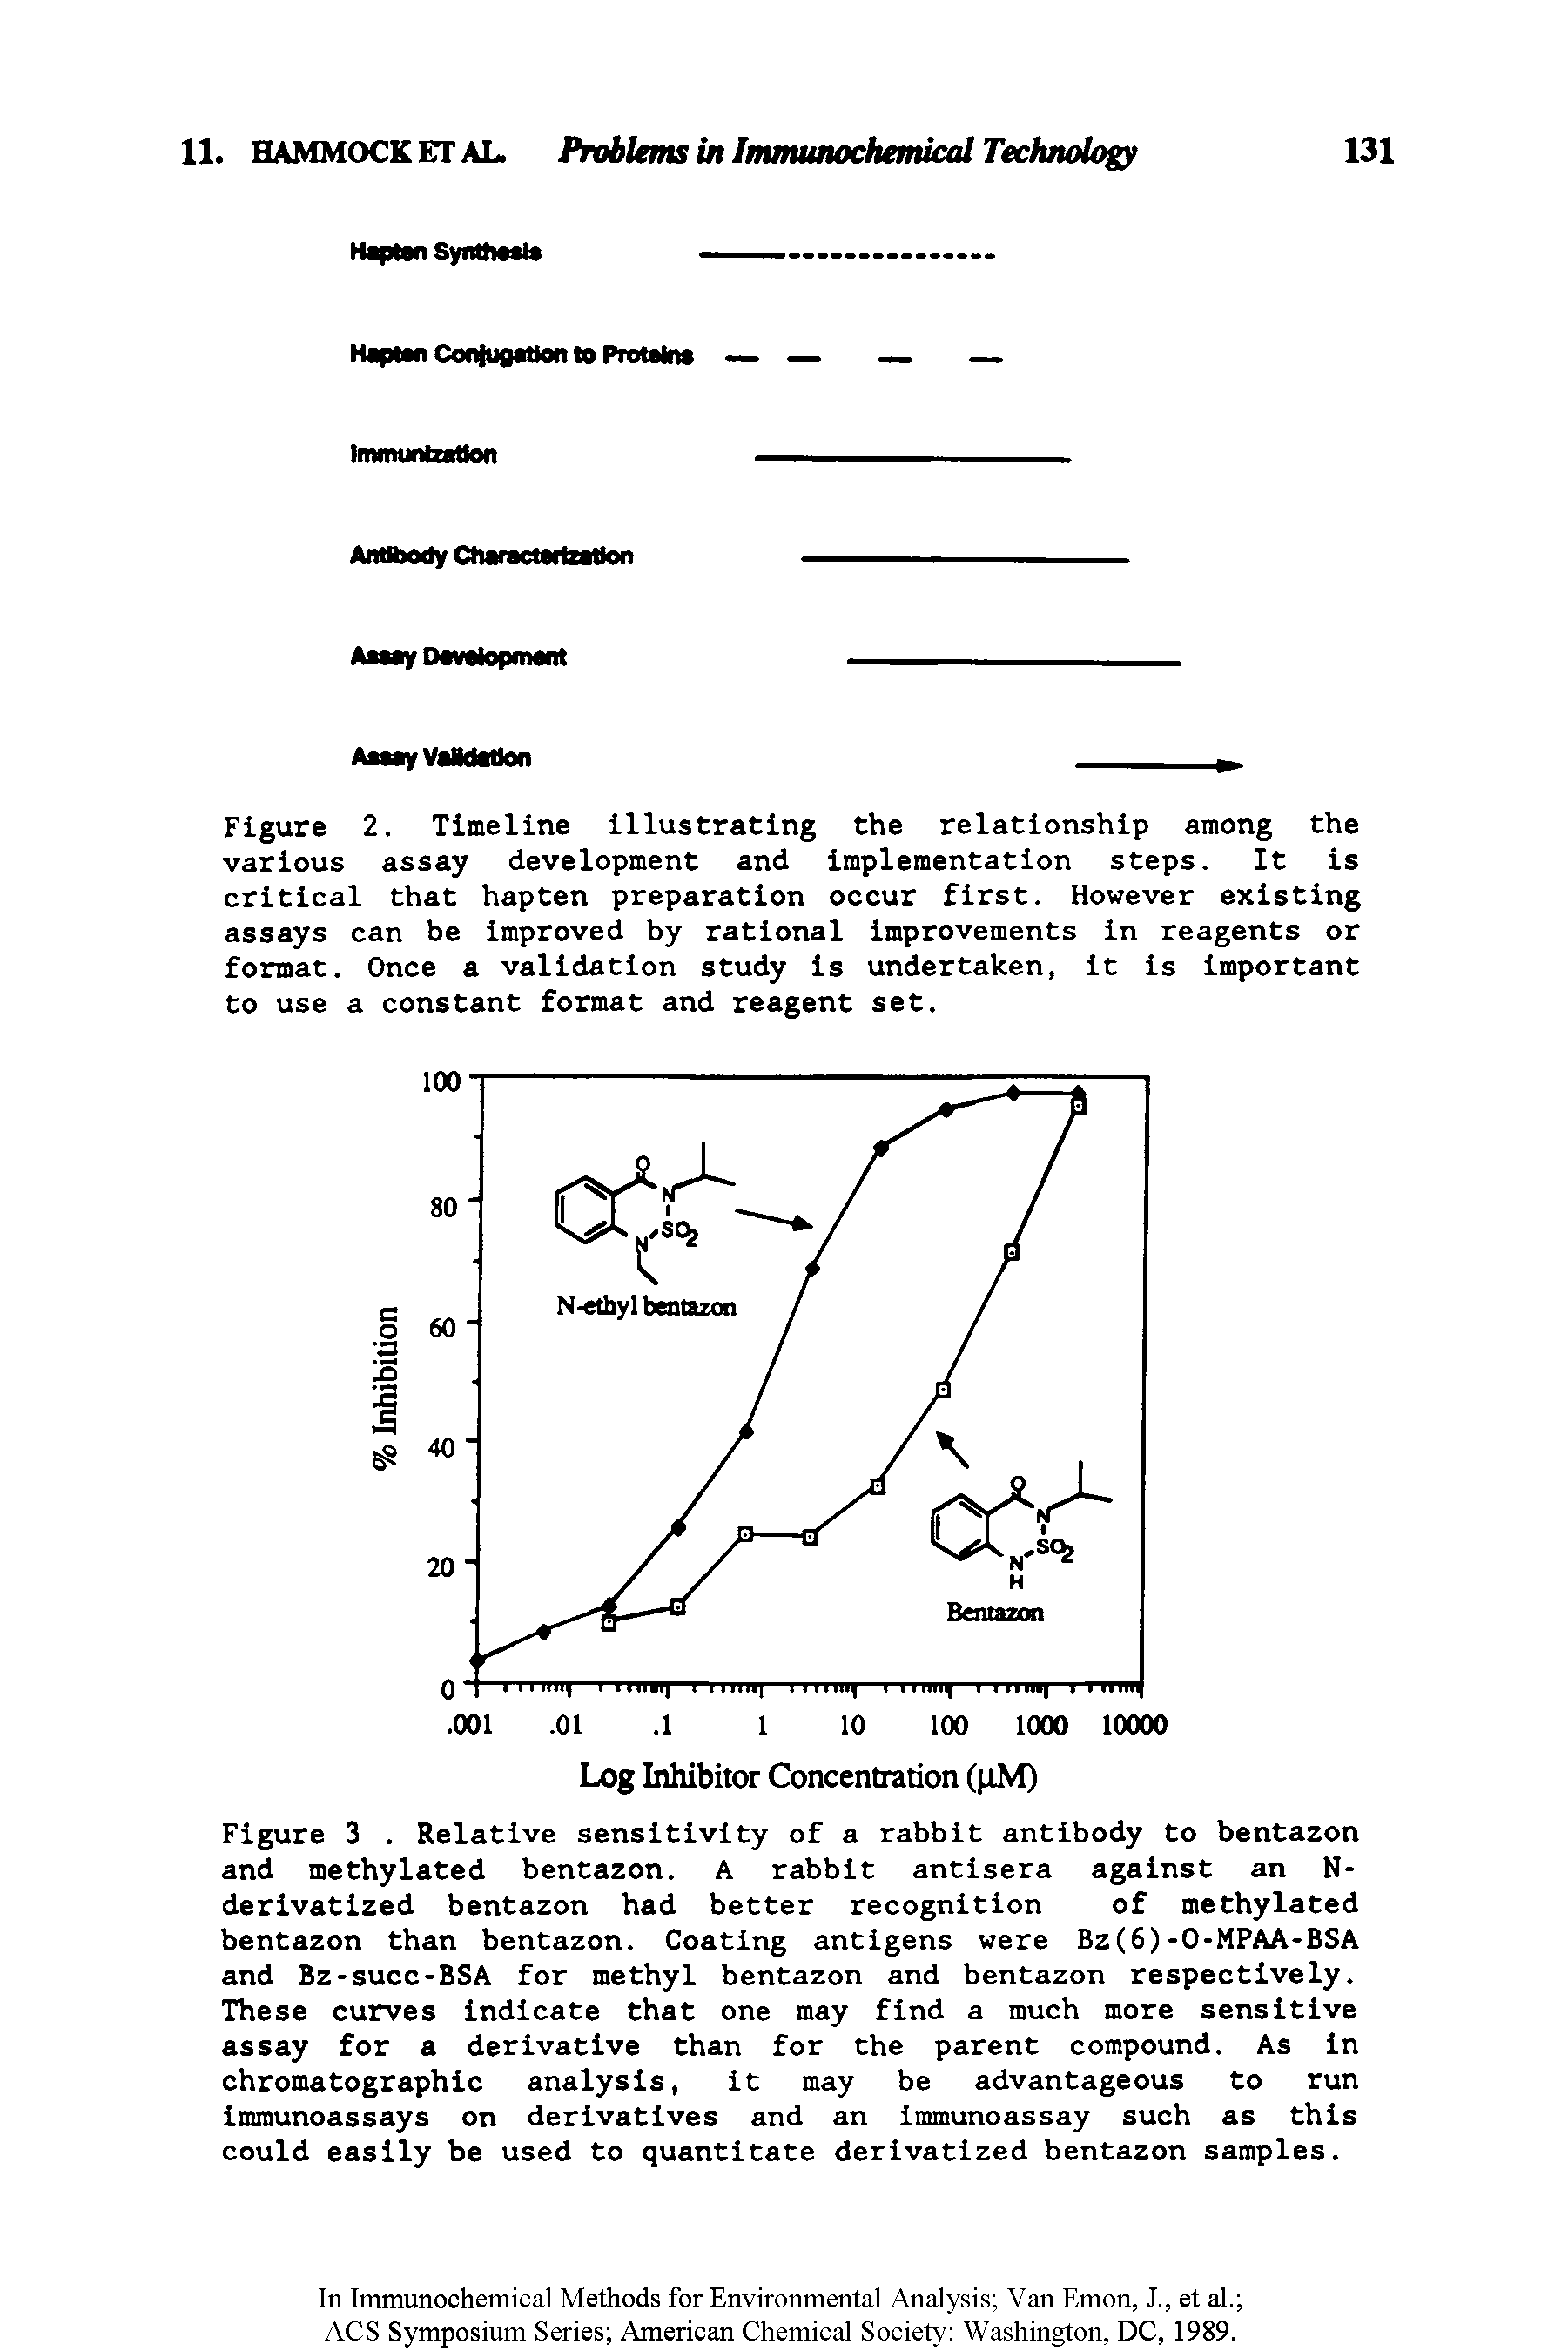 Figure 2. Timeline illustrating the relationship among the various assay development and implementation steps. It is critical that hapten preparation occur first. However existing assays can be improved by rational improvements in reagents or format. Once a validation study is undertaken, it is important to use a constant format and reagent set.